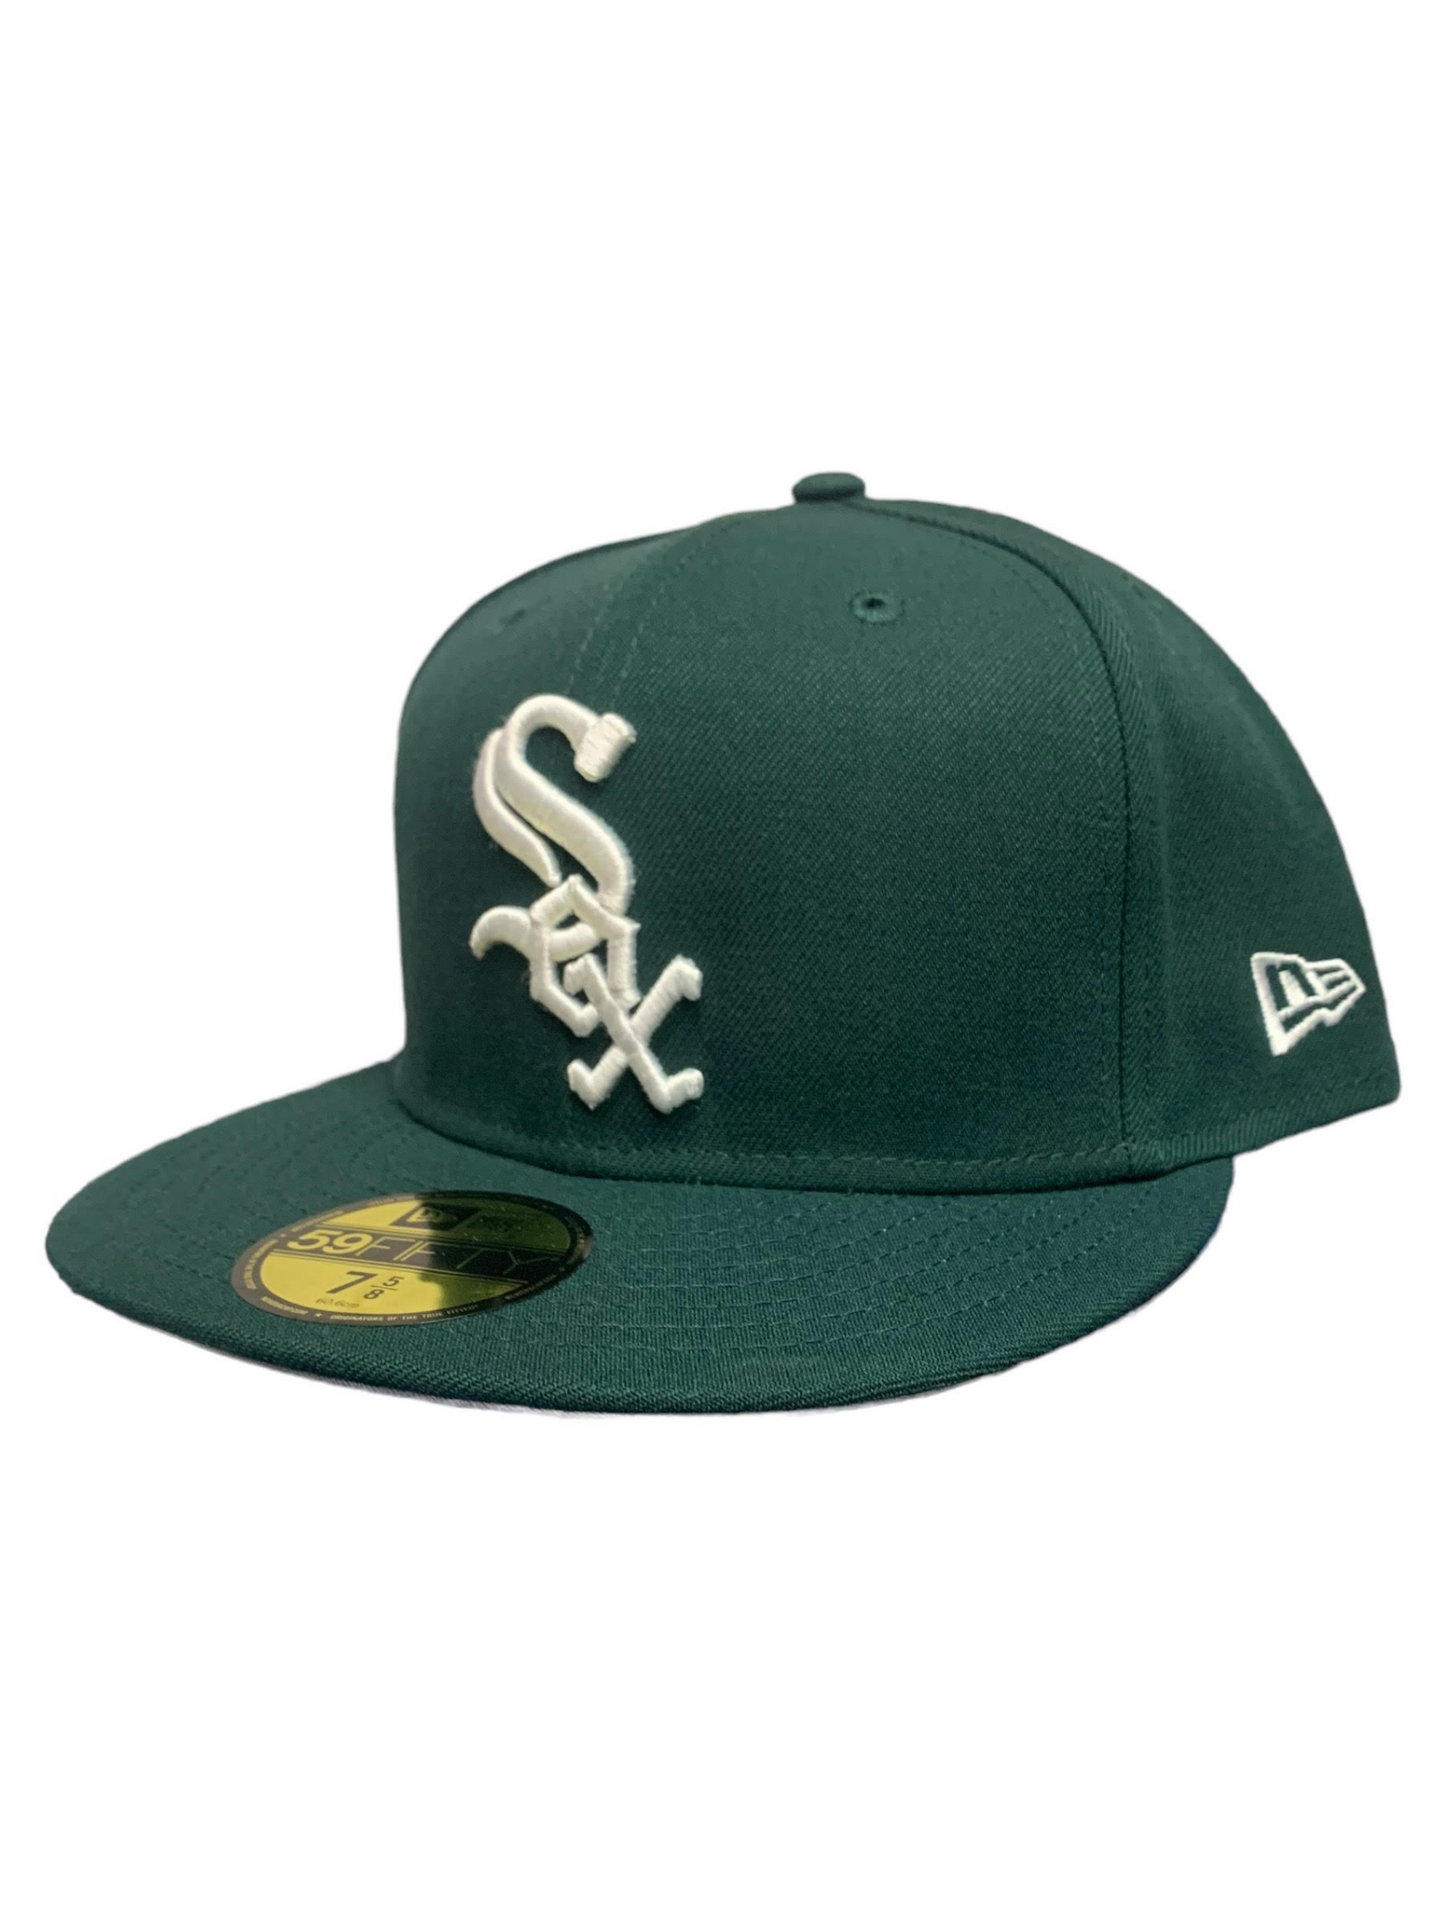 CHICAGO WHITE SOX BASIC LOGO 59FIFTY FITTED HAT - DARK GREEN